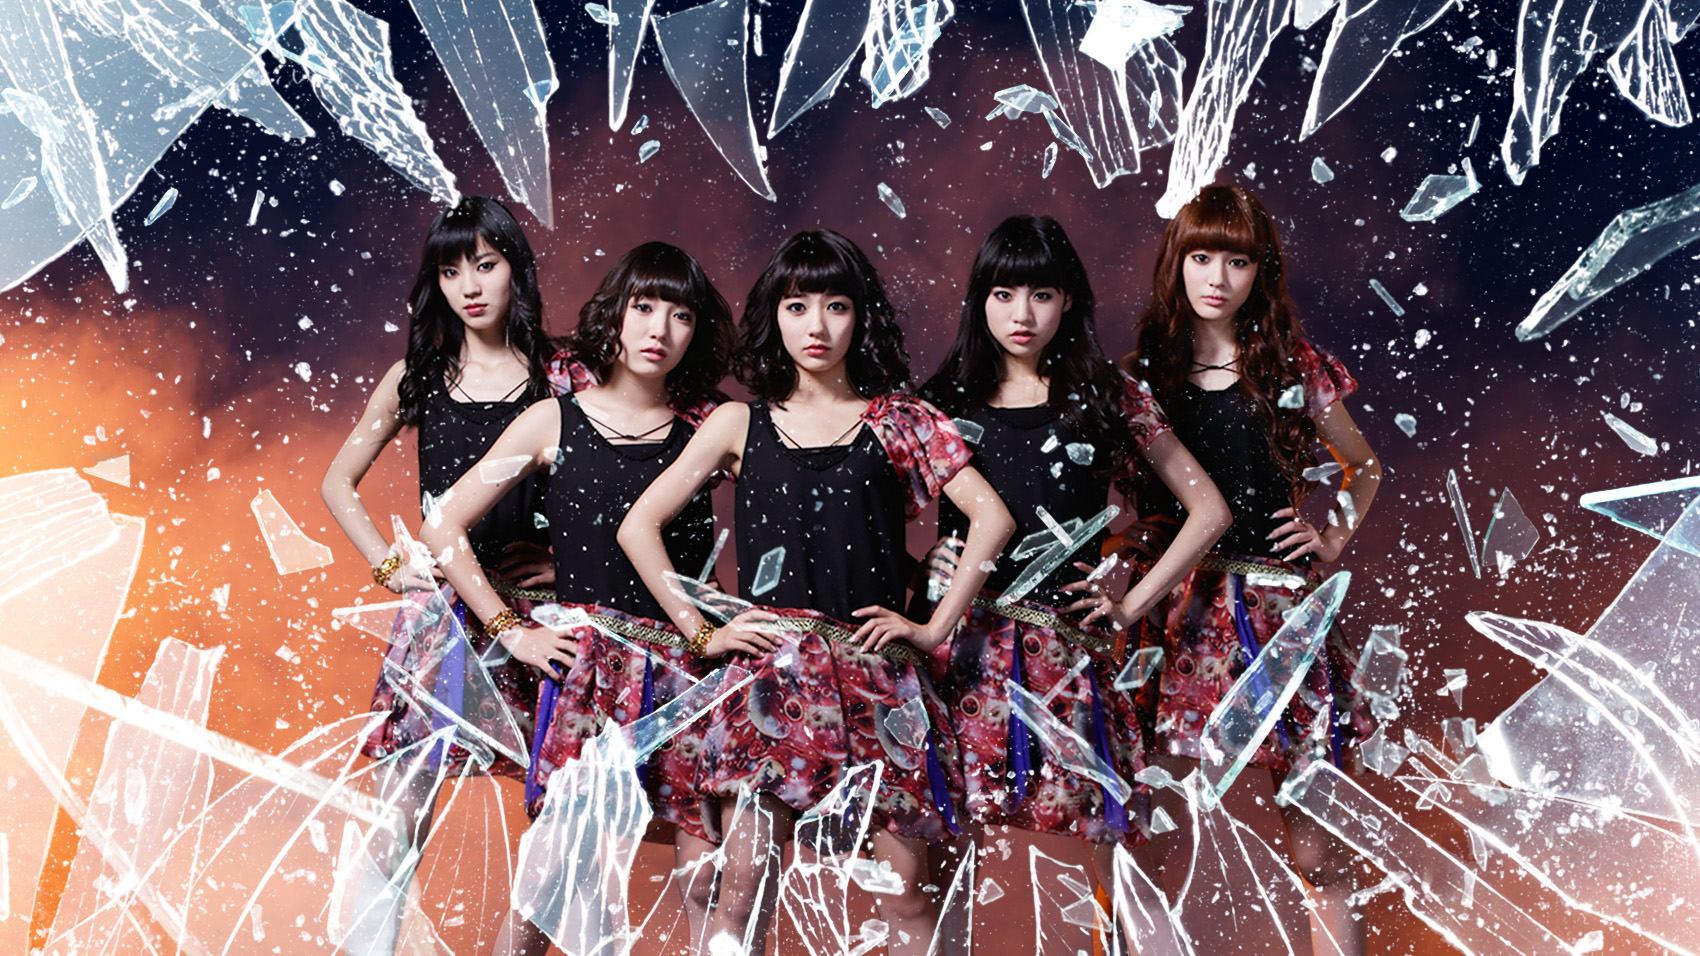 Yumemiru Adolescence Reveals MV for their New Song “Syoumei Teenager”